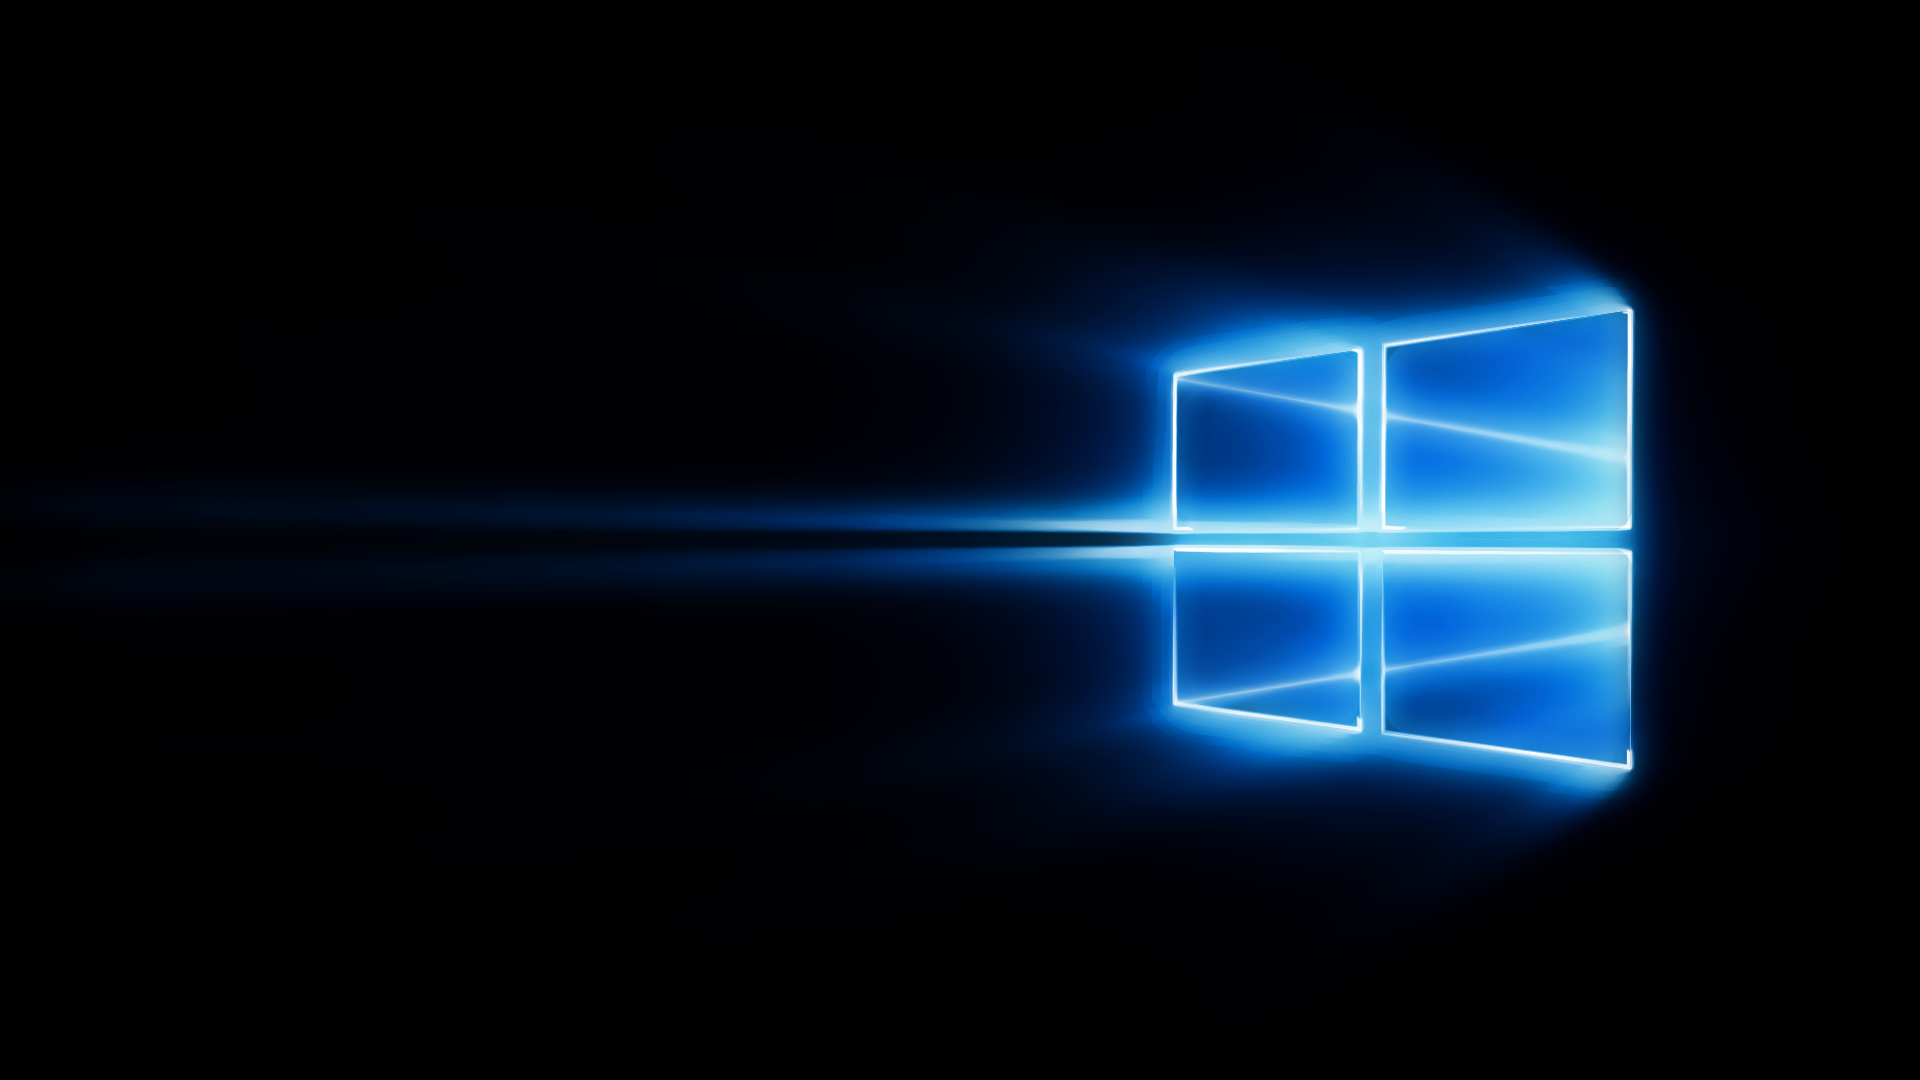 Free download Windows 10 Themes Wallpapers 5862 Wallpapers Themes [1920x1080] for your Desktop, Mobile & Tablet